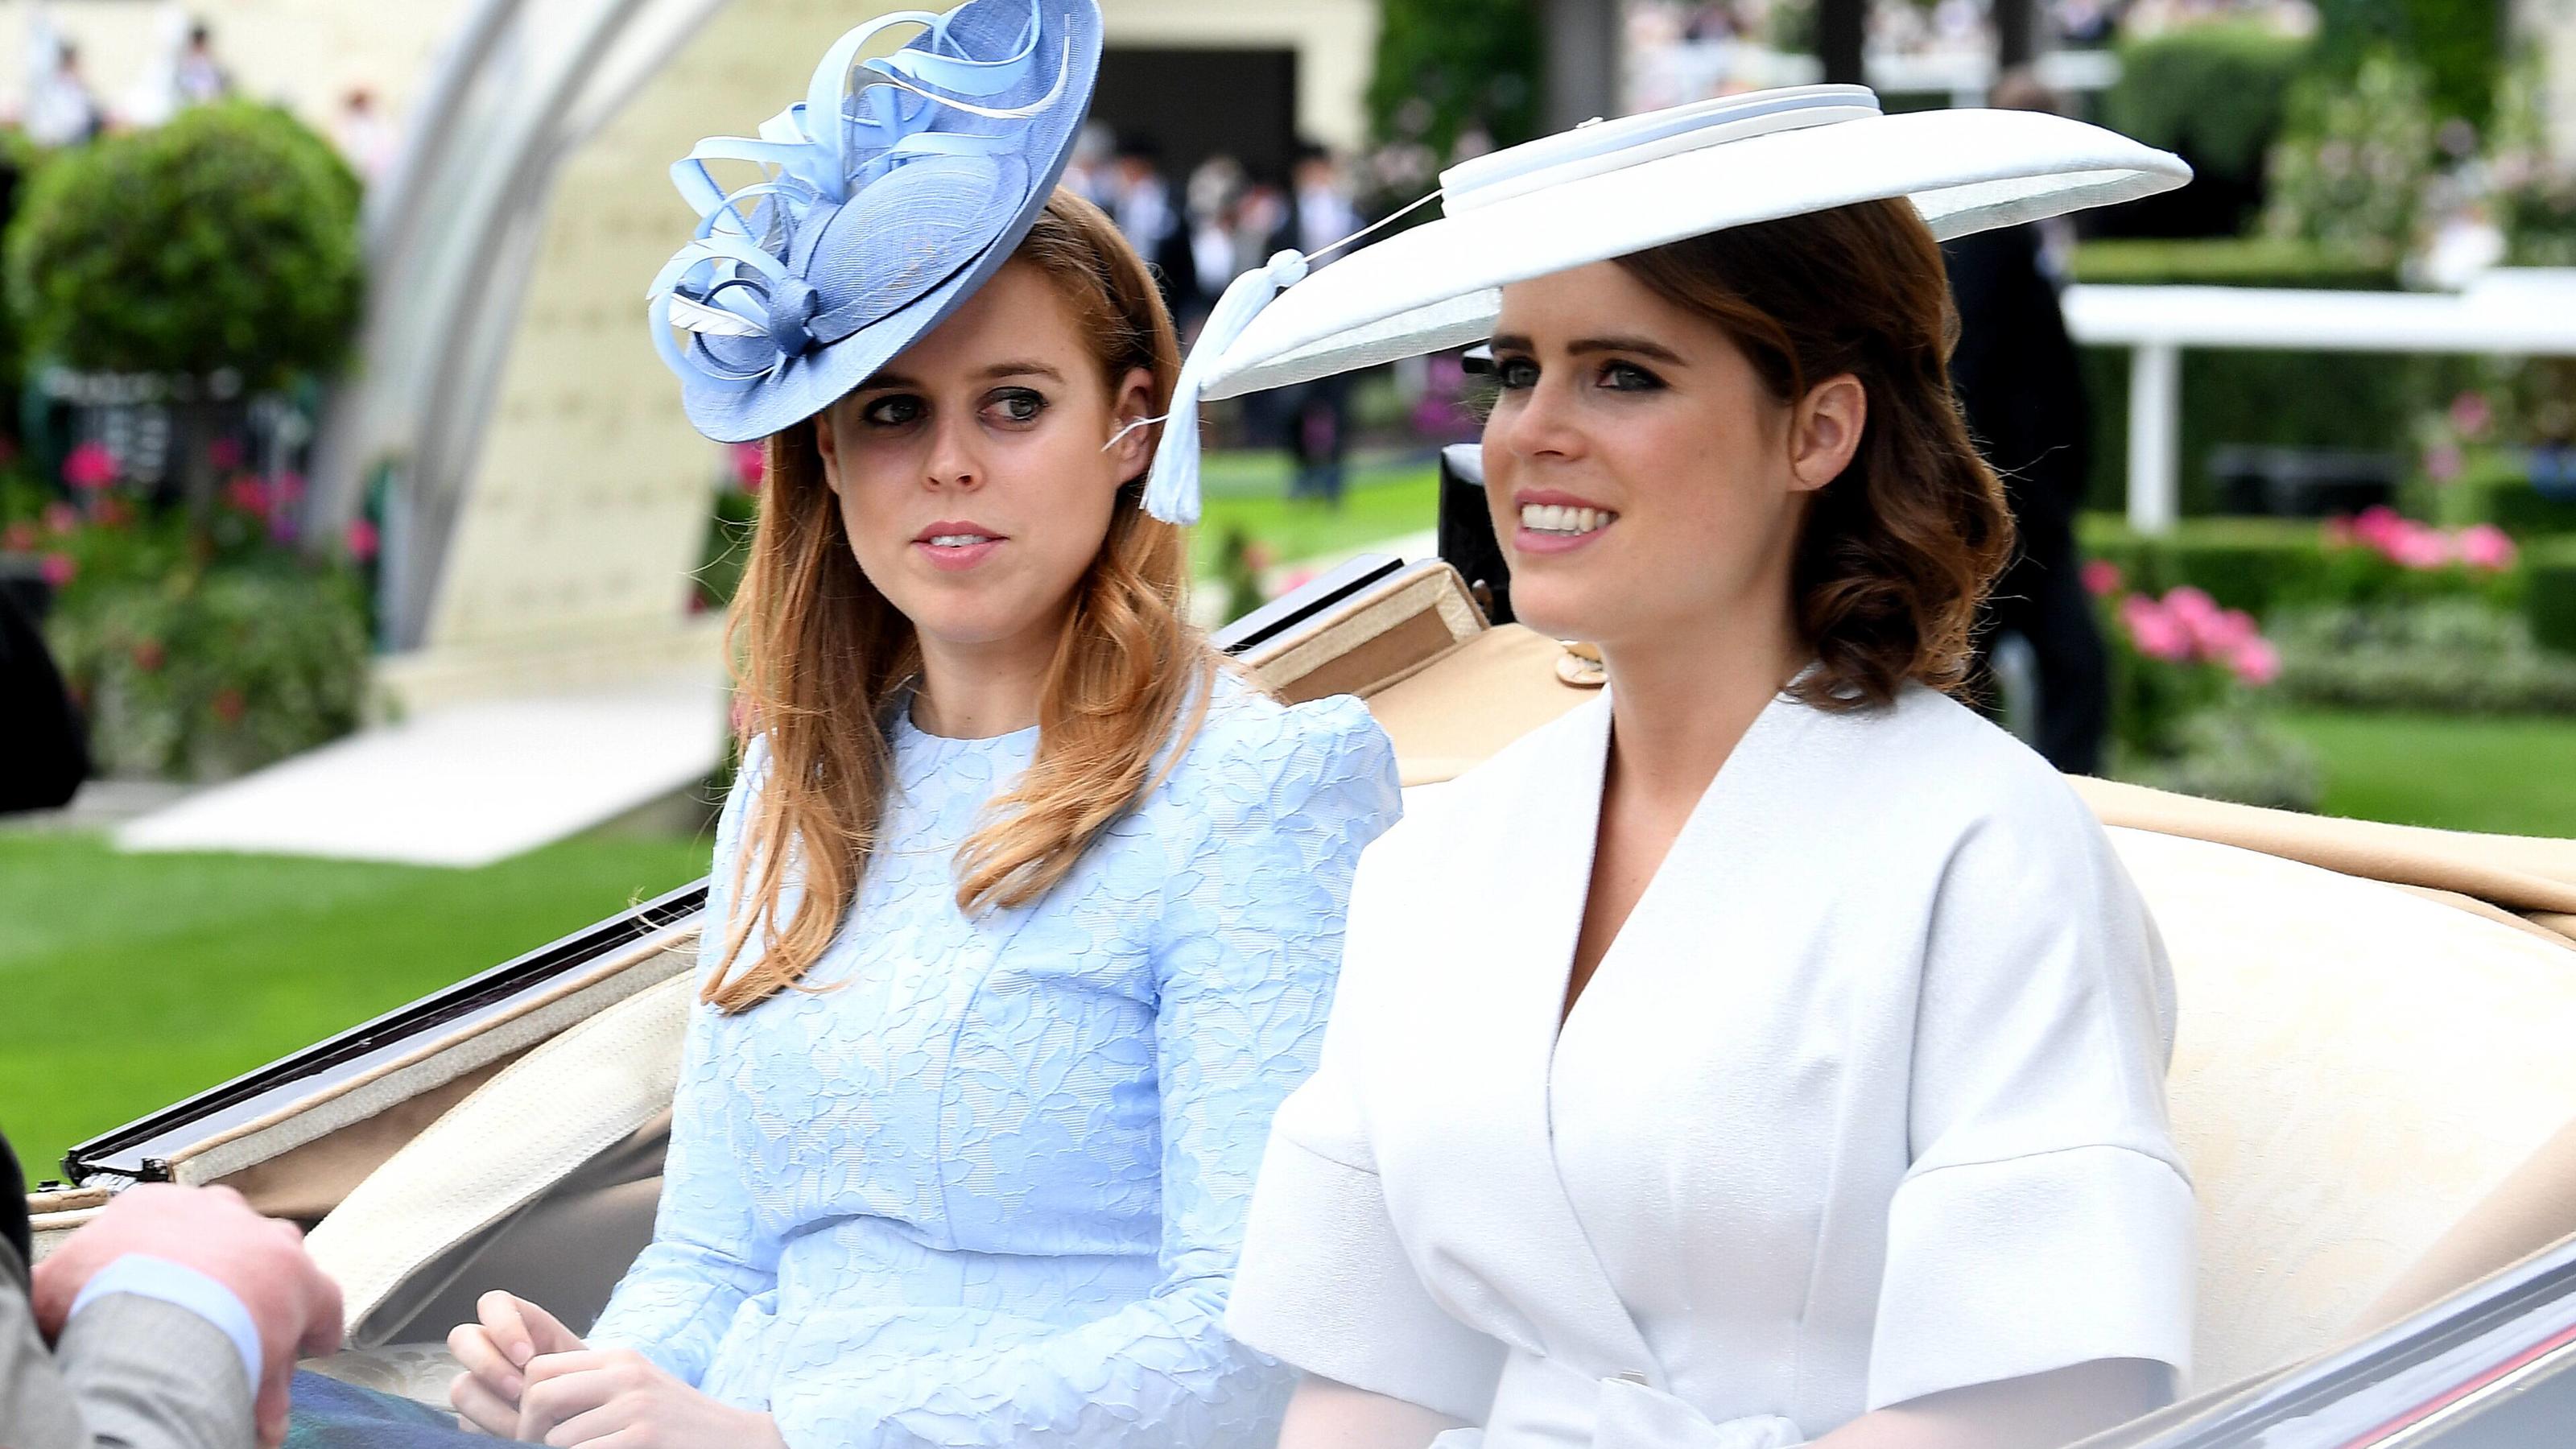 Royal Ascot - Day One - Ascot Racecourse Princess Beatrice (left) and Eugenie (right) during day one of Royal Ascot at Ascot Racecourse Use subject to restrictions. Editorial use only, no commercial or promotional use. No private sales. PUBLICATIONxI